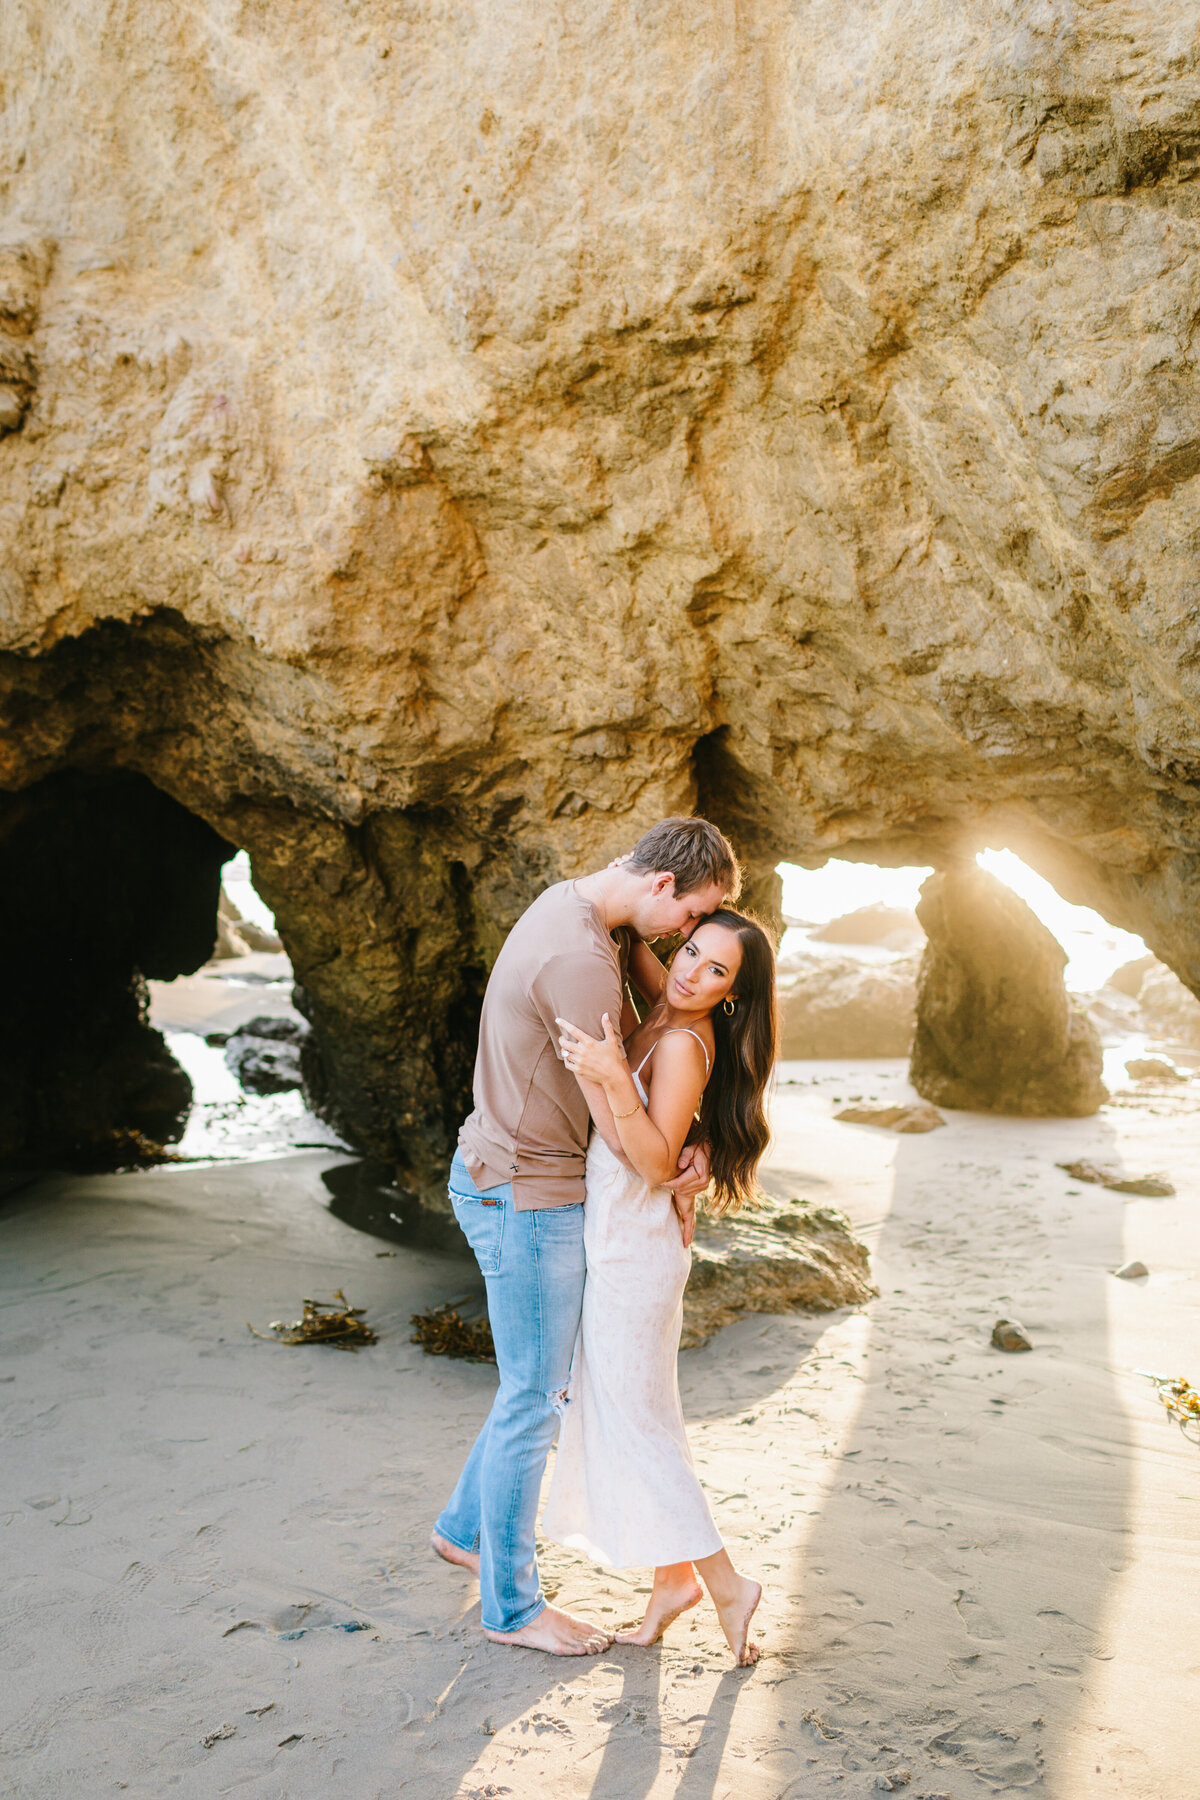 Best California and Texas Engagement Photographer-Jodee Debes Photography-287